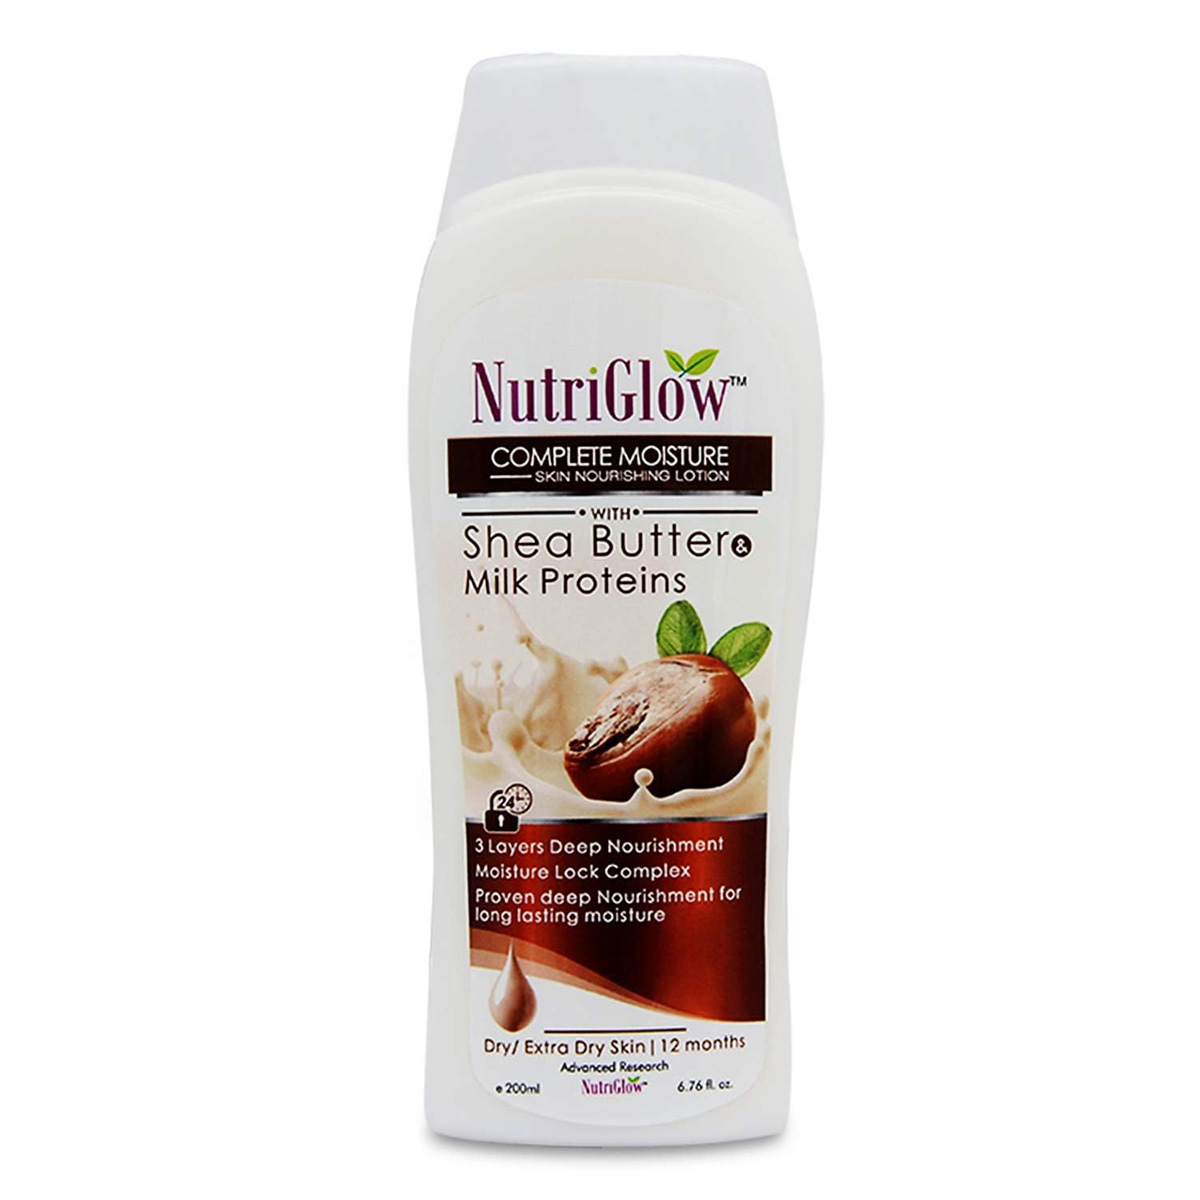 NutriGlow Complete Moisture Skin Nourishing Lotion With Shea Butter & Milk Protein, 200ml